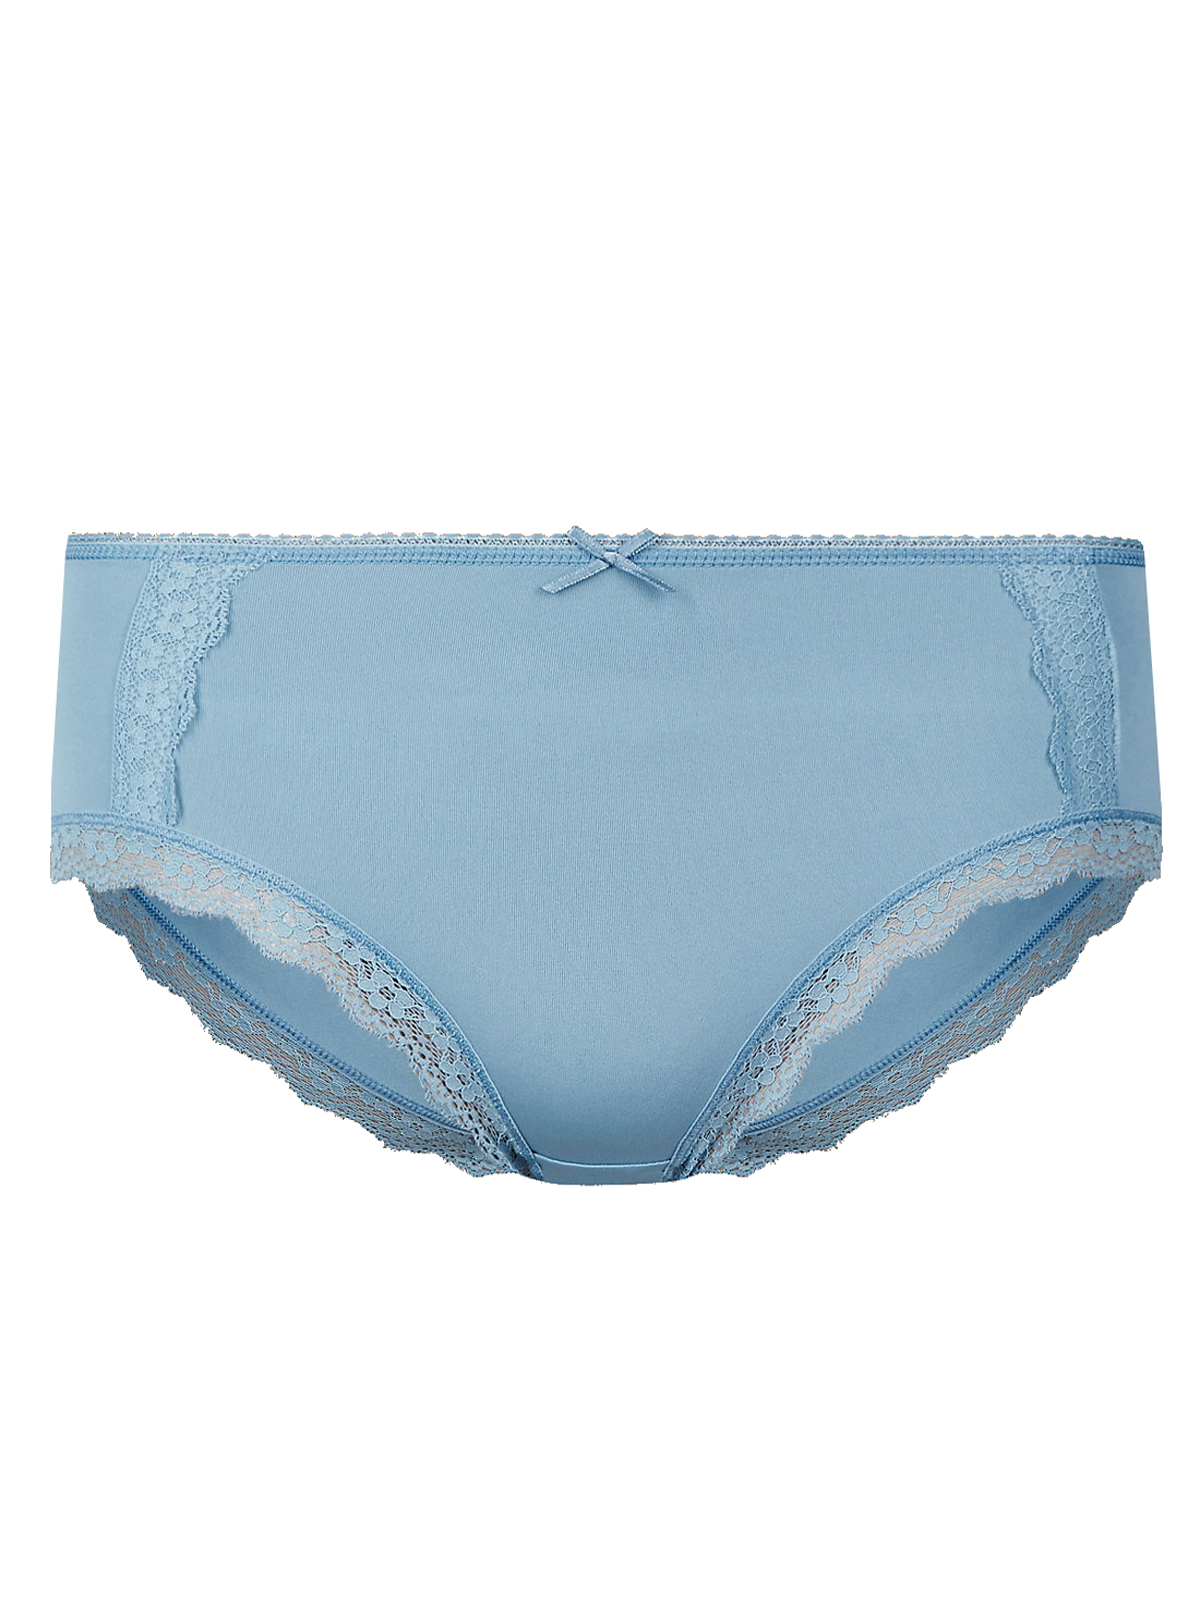 Marks and Spencer - - M&5 SKY-BLUE Lace Trim Midi Knickers - Size 8 to 20